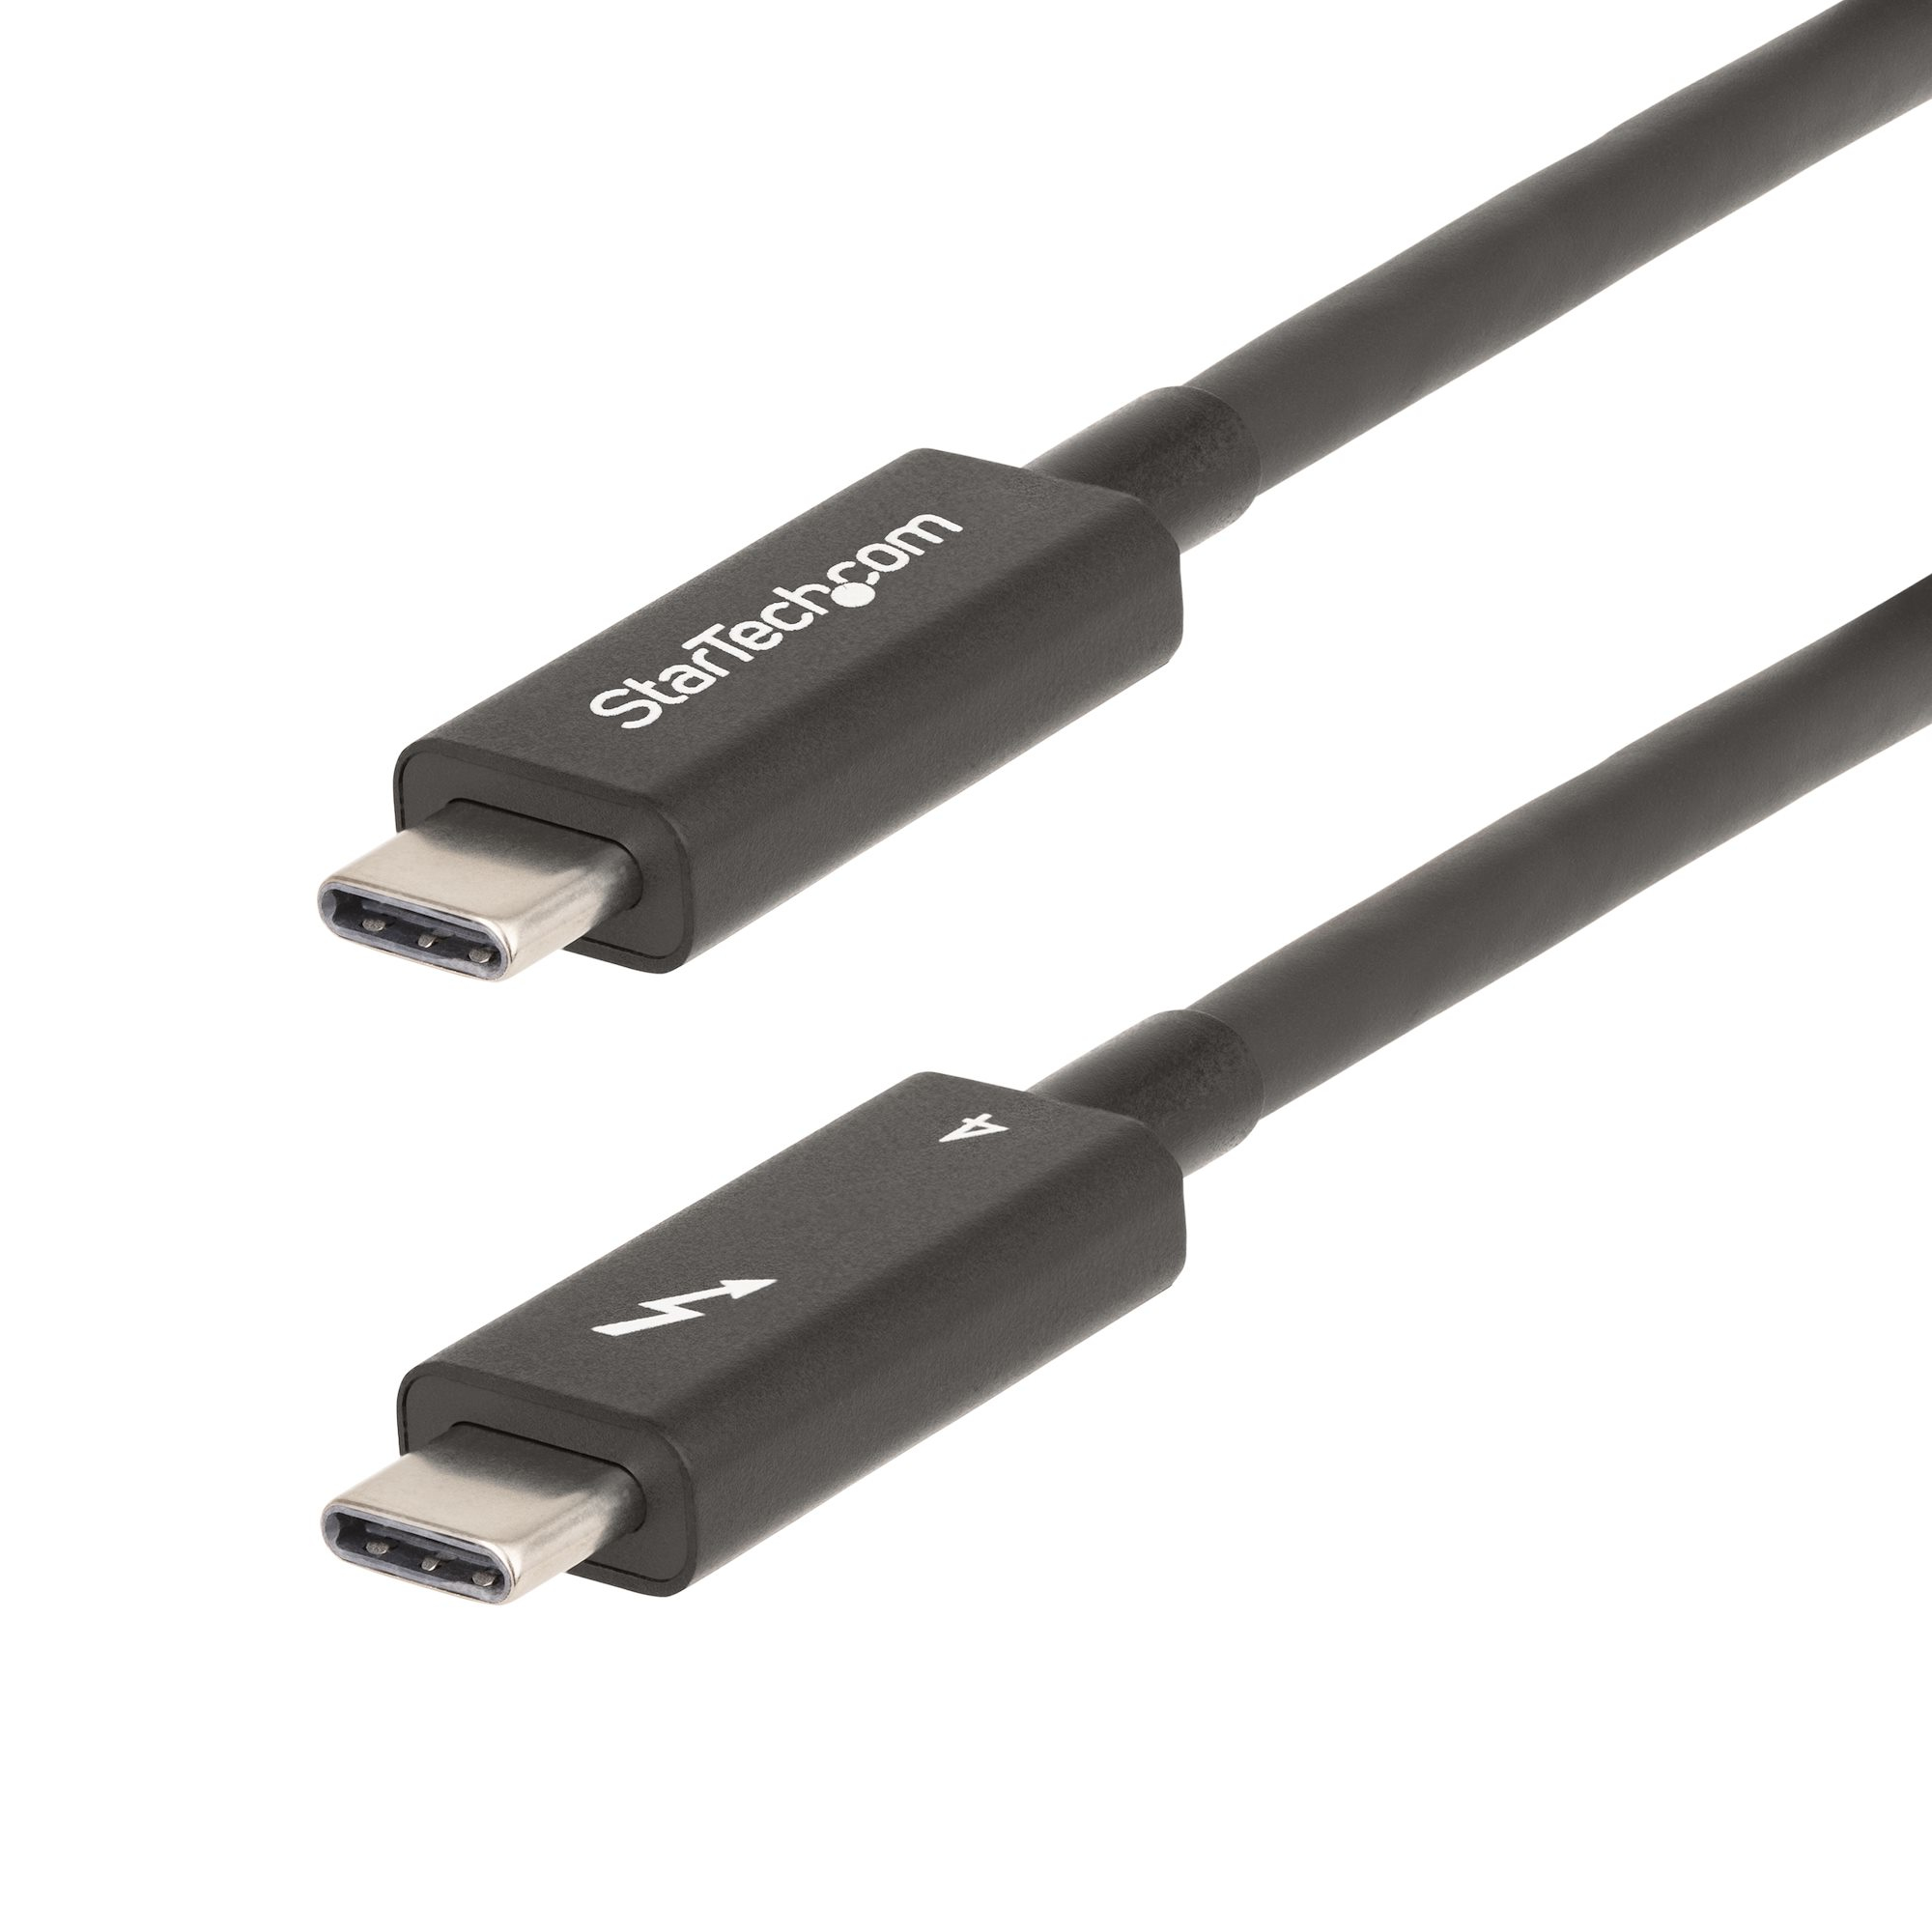 Startech - Cables                6ft Thunderbolt 4 Cable             Intel Certified Tb4/usb4 Compat     A40g2mb-tb4-cable